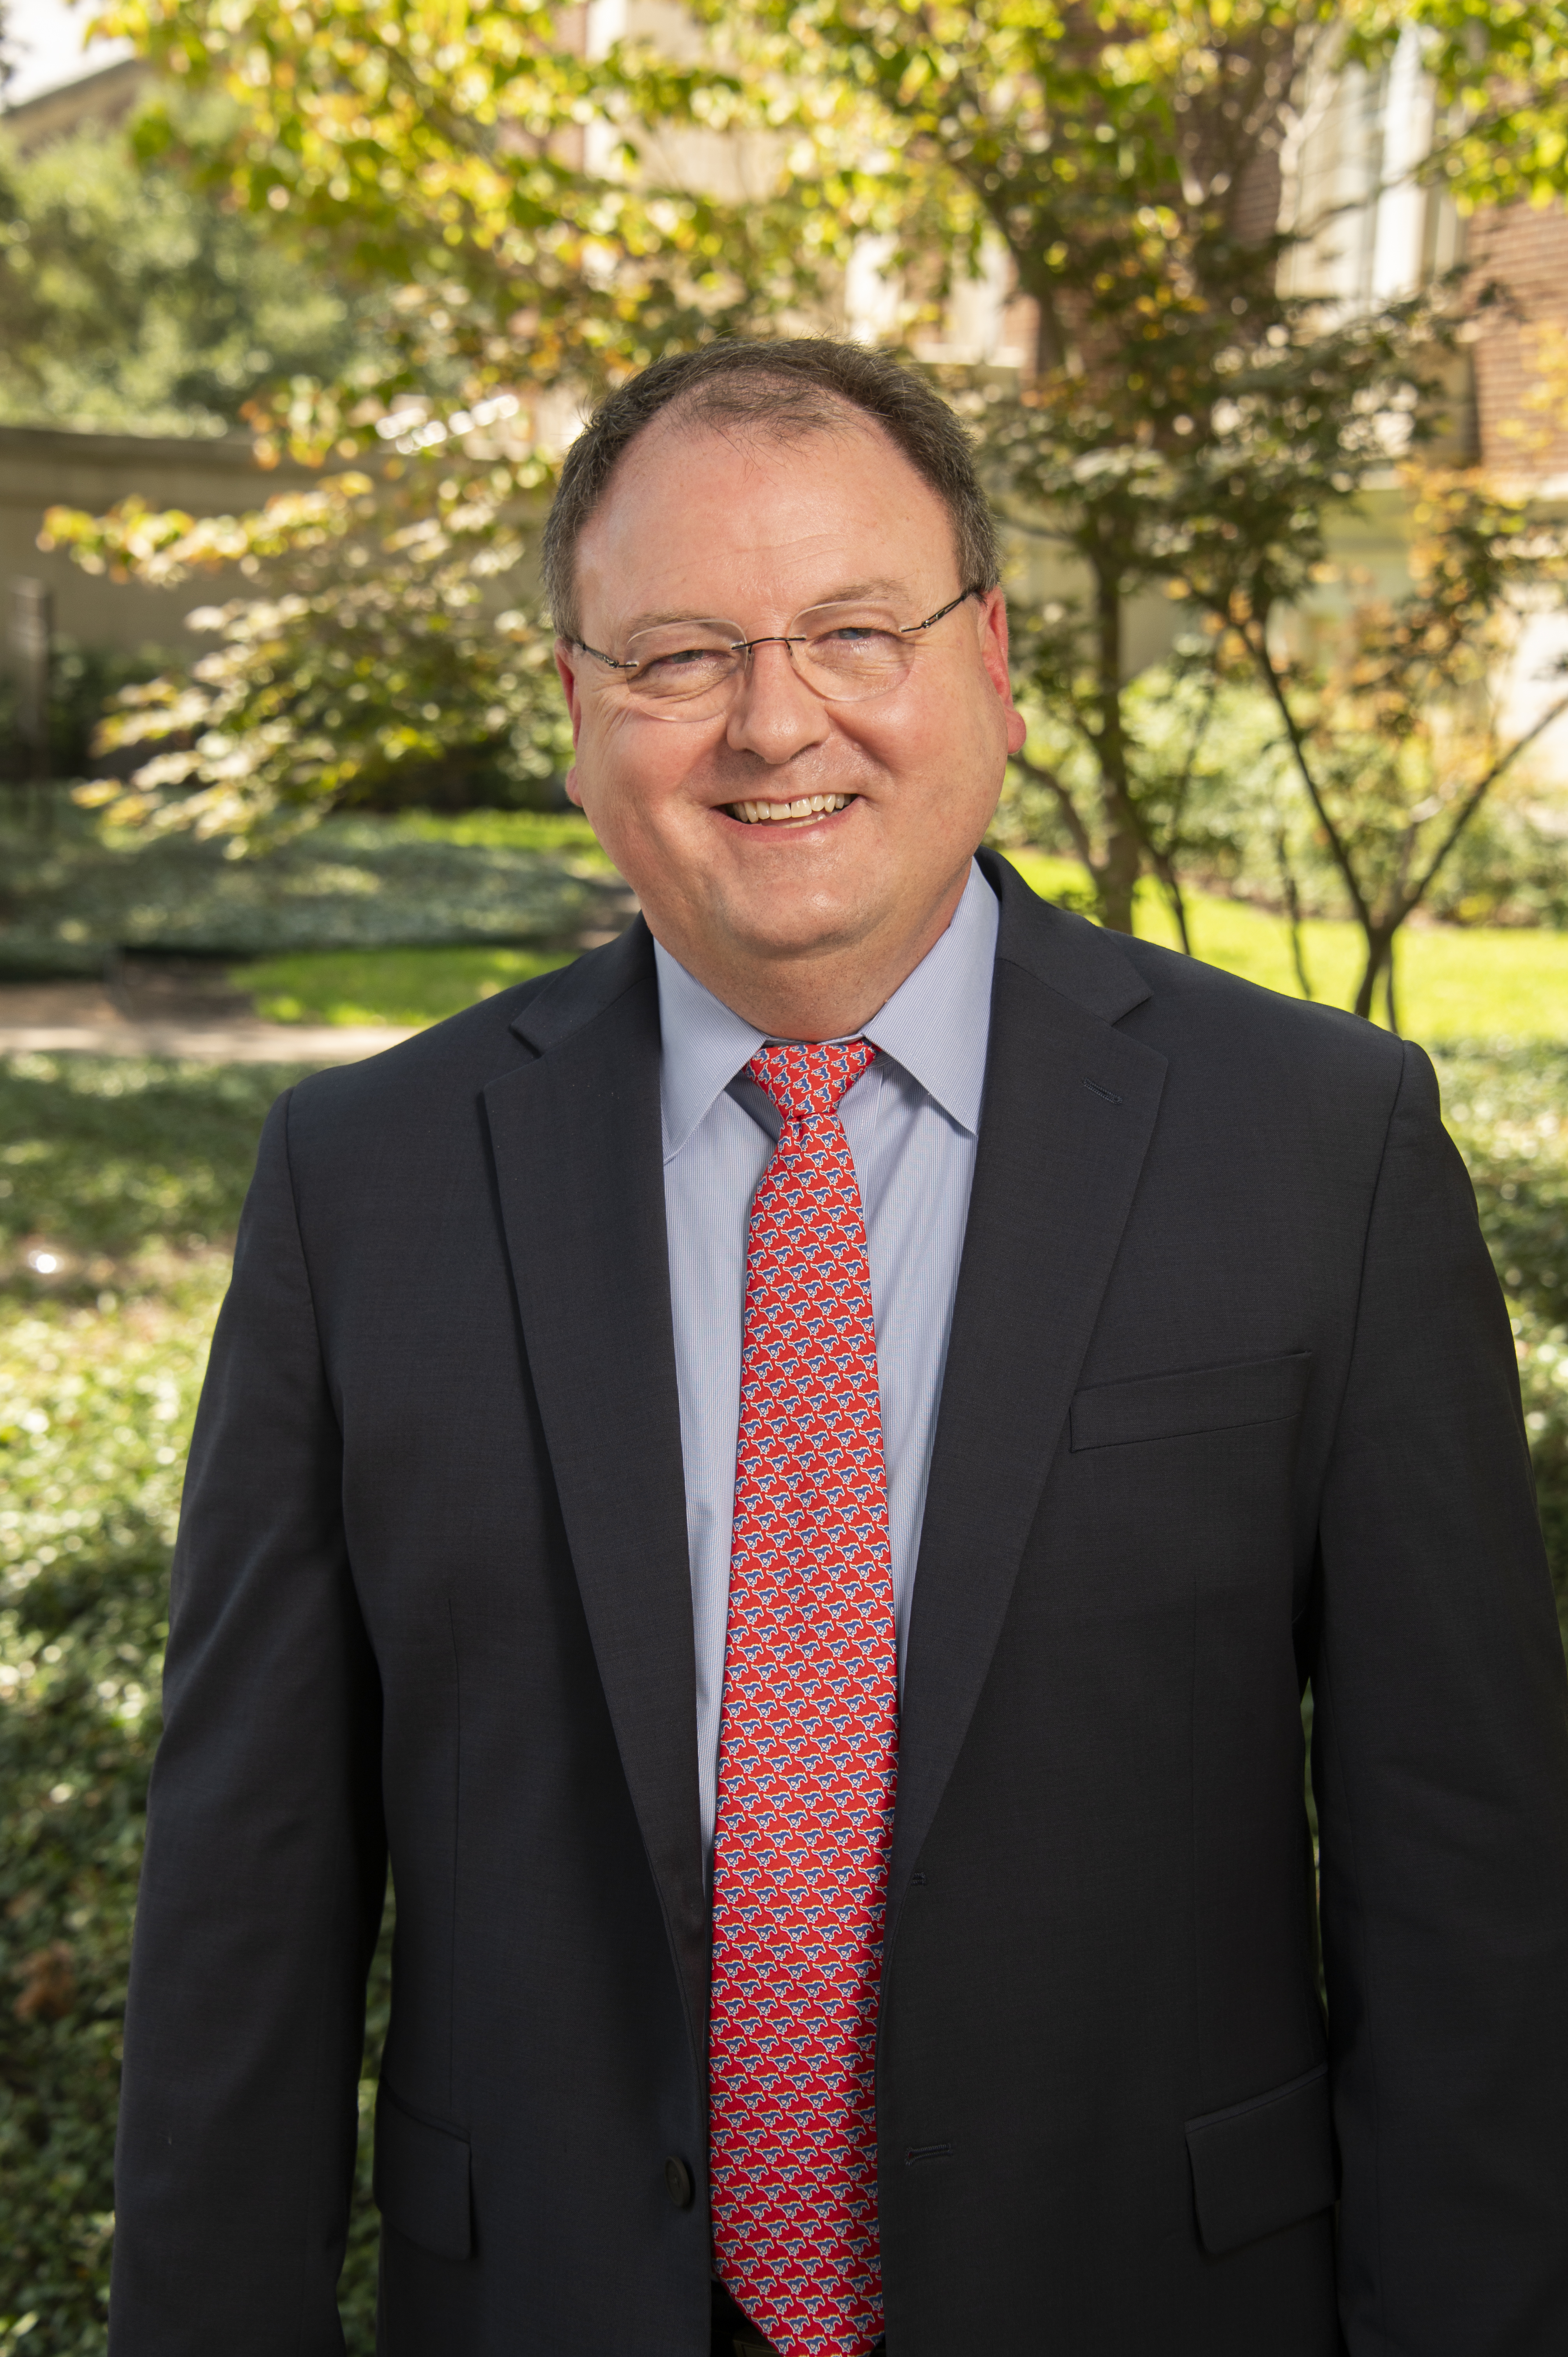 Wes K. Waggoner - Office of the Provost